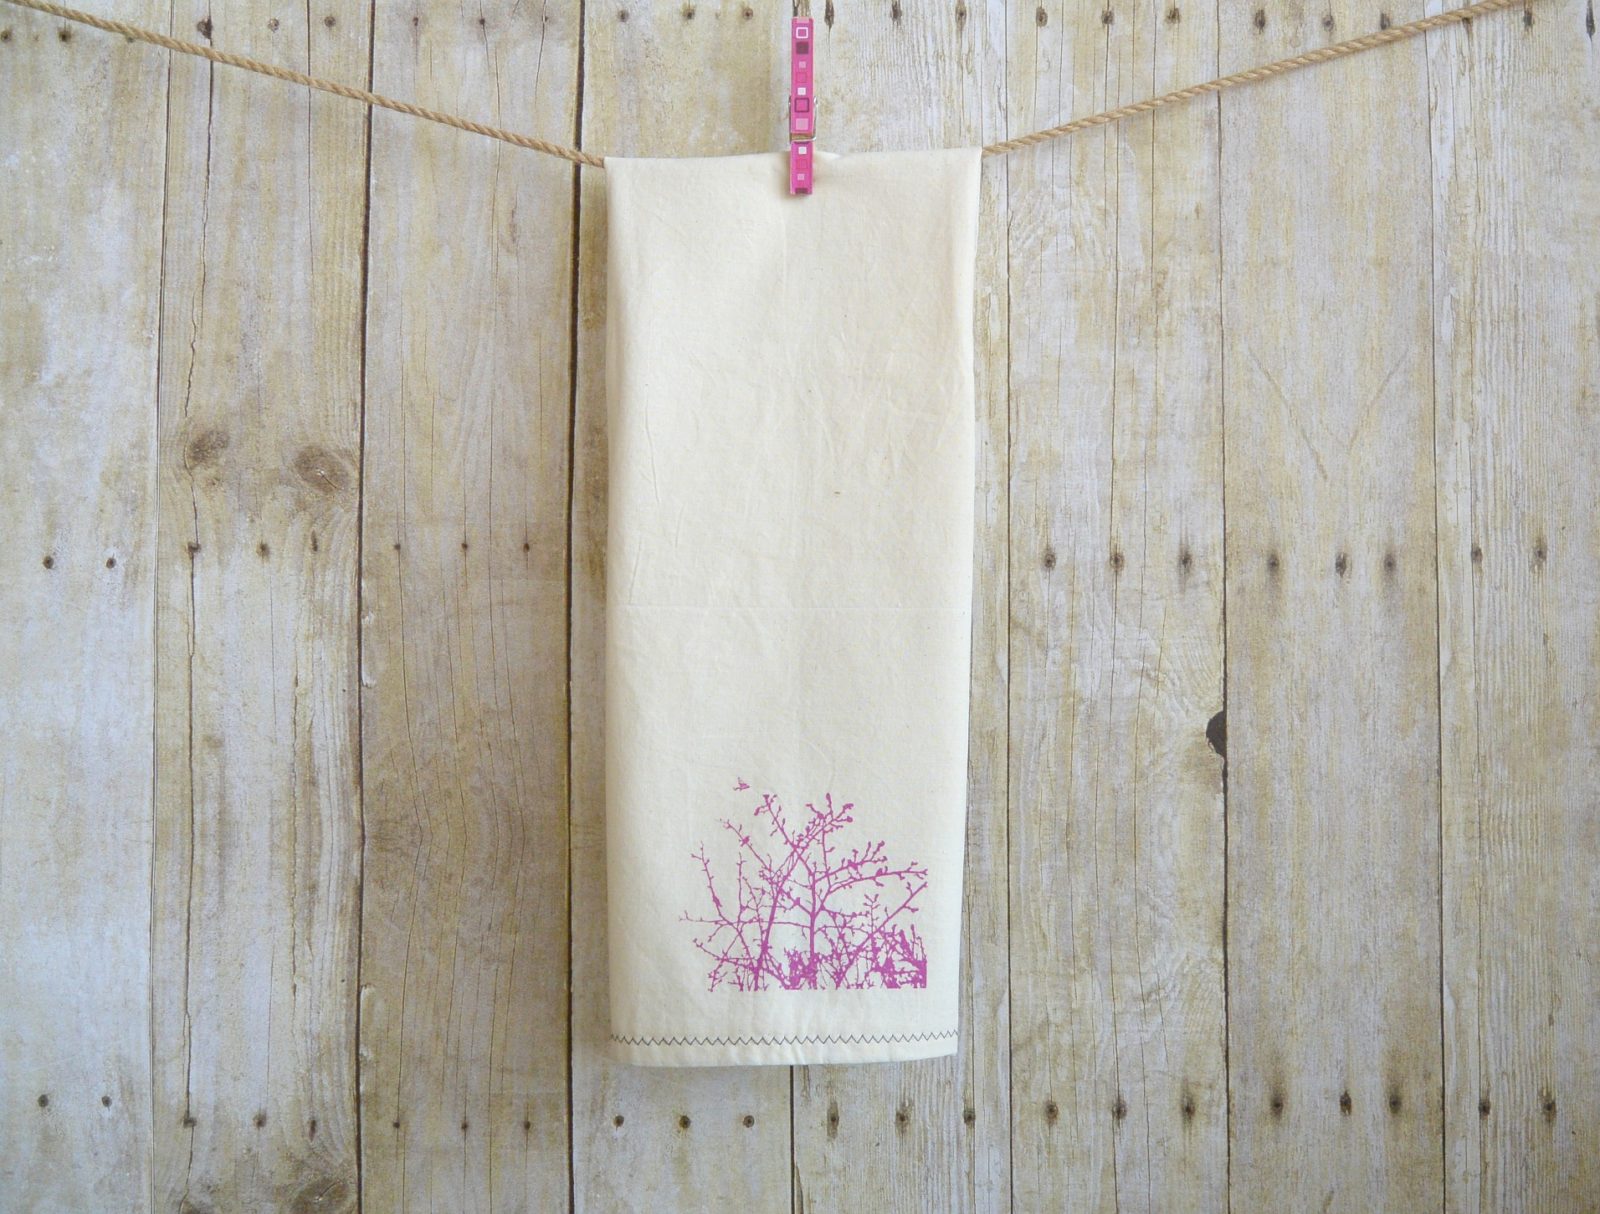 https://www.mamainastitch.com/how-to-sew-and-hand-print-your-own-tea-towels/birds-towel/